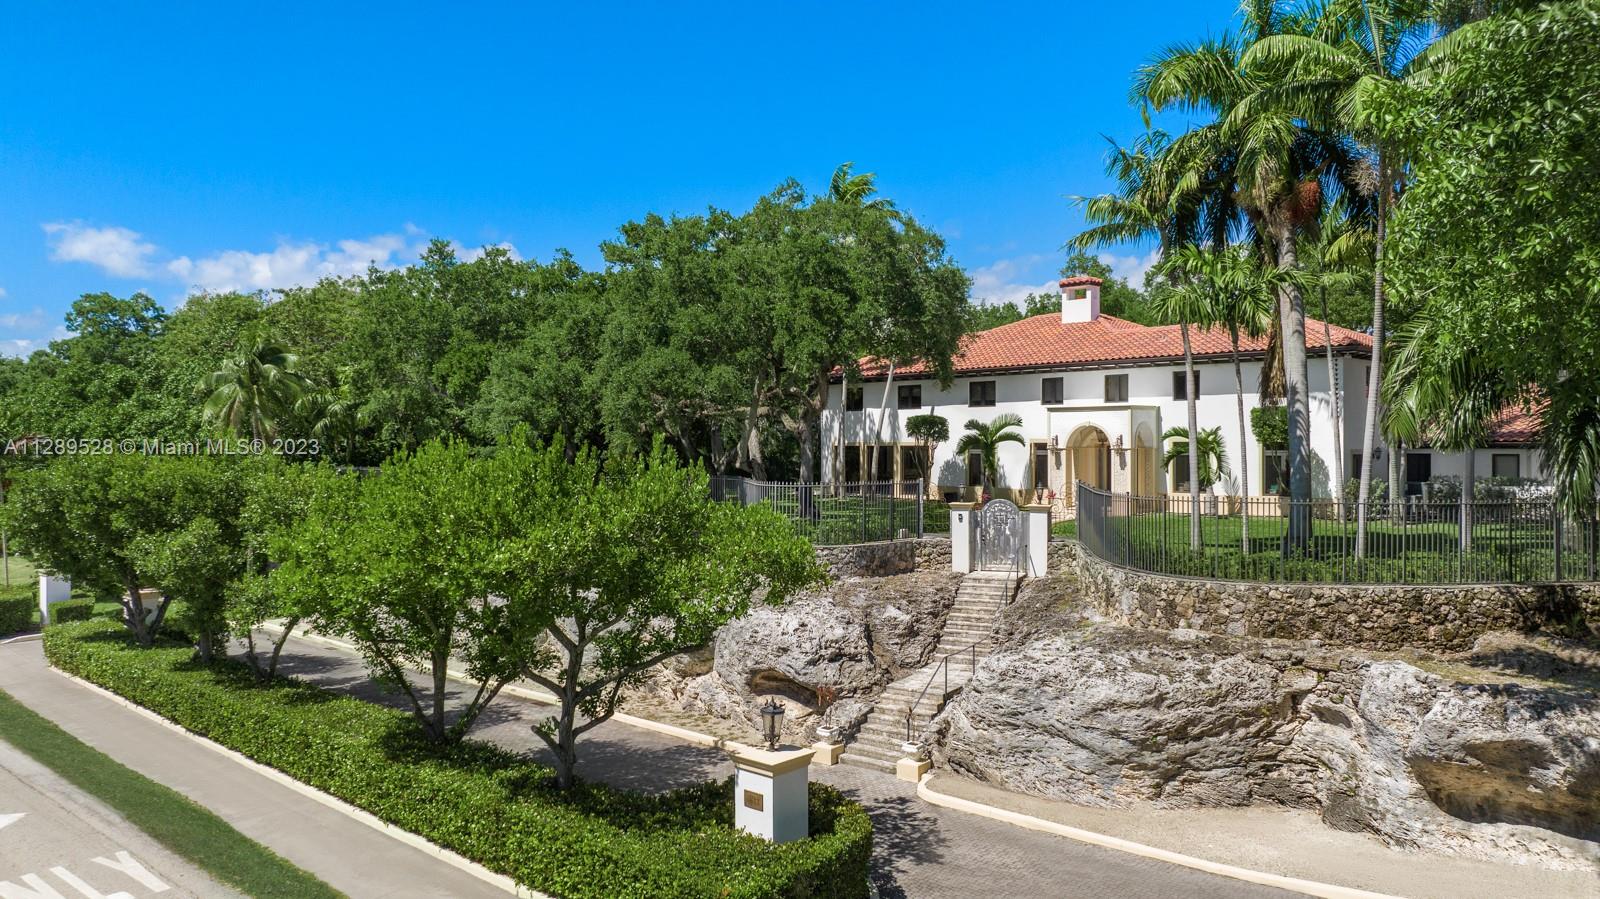 Indulge in the luxurious charm of this landmark estate in the heart of Coconut Grove. This 9,534 sq ft Mediterranean revival villa on a 40,000+ sq ft lot boasts smart home tech and an elevator, fully renovated in 2015. Enjoy breathtaking views of mature oak trees and manicured grounds through large windows while relishing in modern finishes and refined interiors. Step inside to find a grand foyer with marble & stone details, high ceilings, an updated open kitchen, and formal dining room with floor to ceiling glass. 7 spacious bedrooms, each with en-suite bath, including a primary suite, embody luxury and modernity. Conveniently located garage with staff quarters and laundry room complete this dream home.